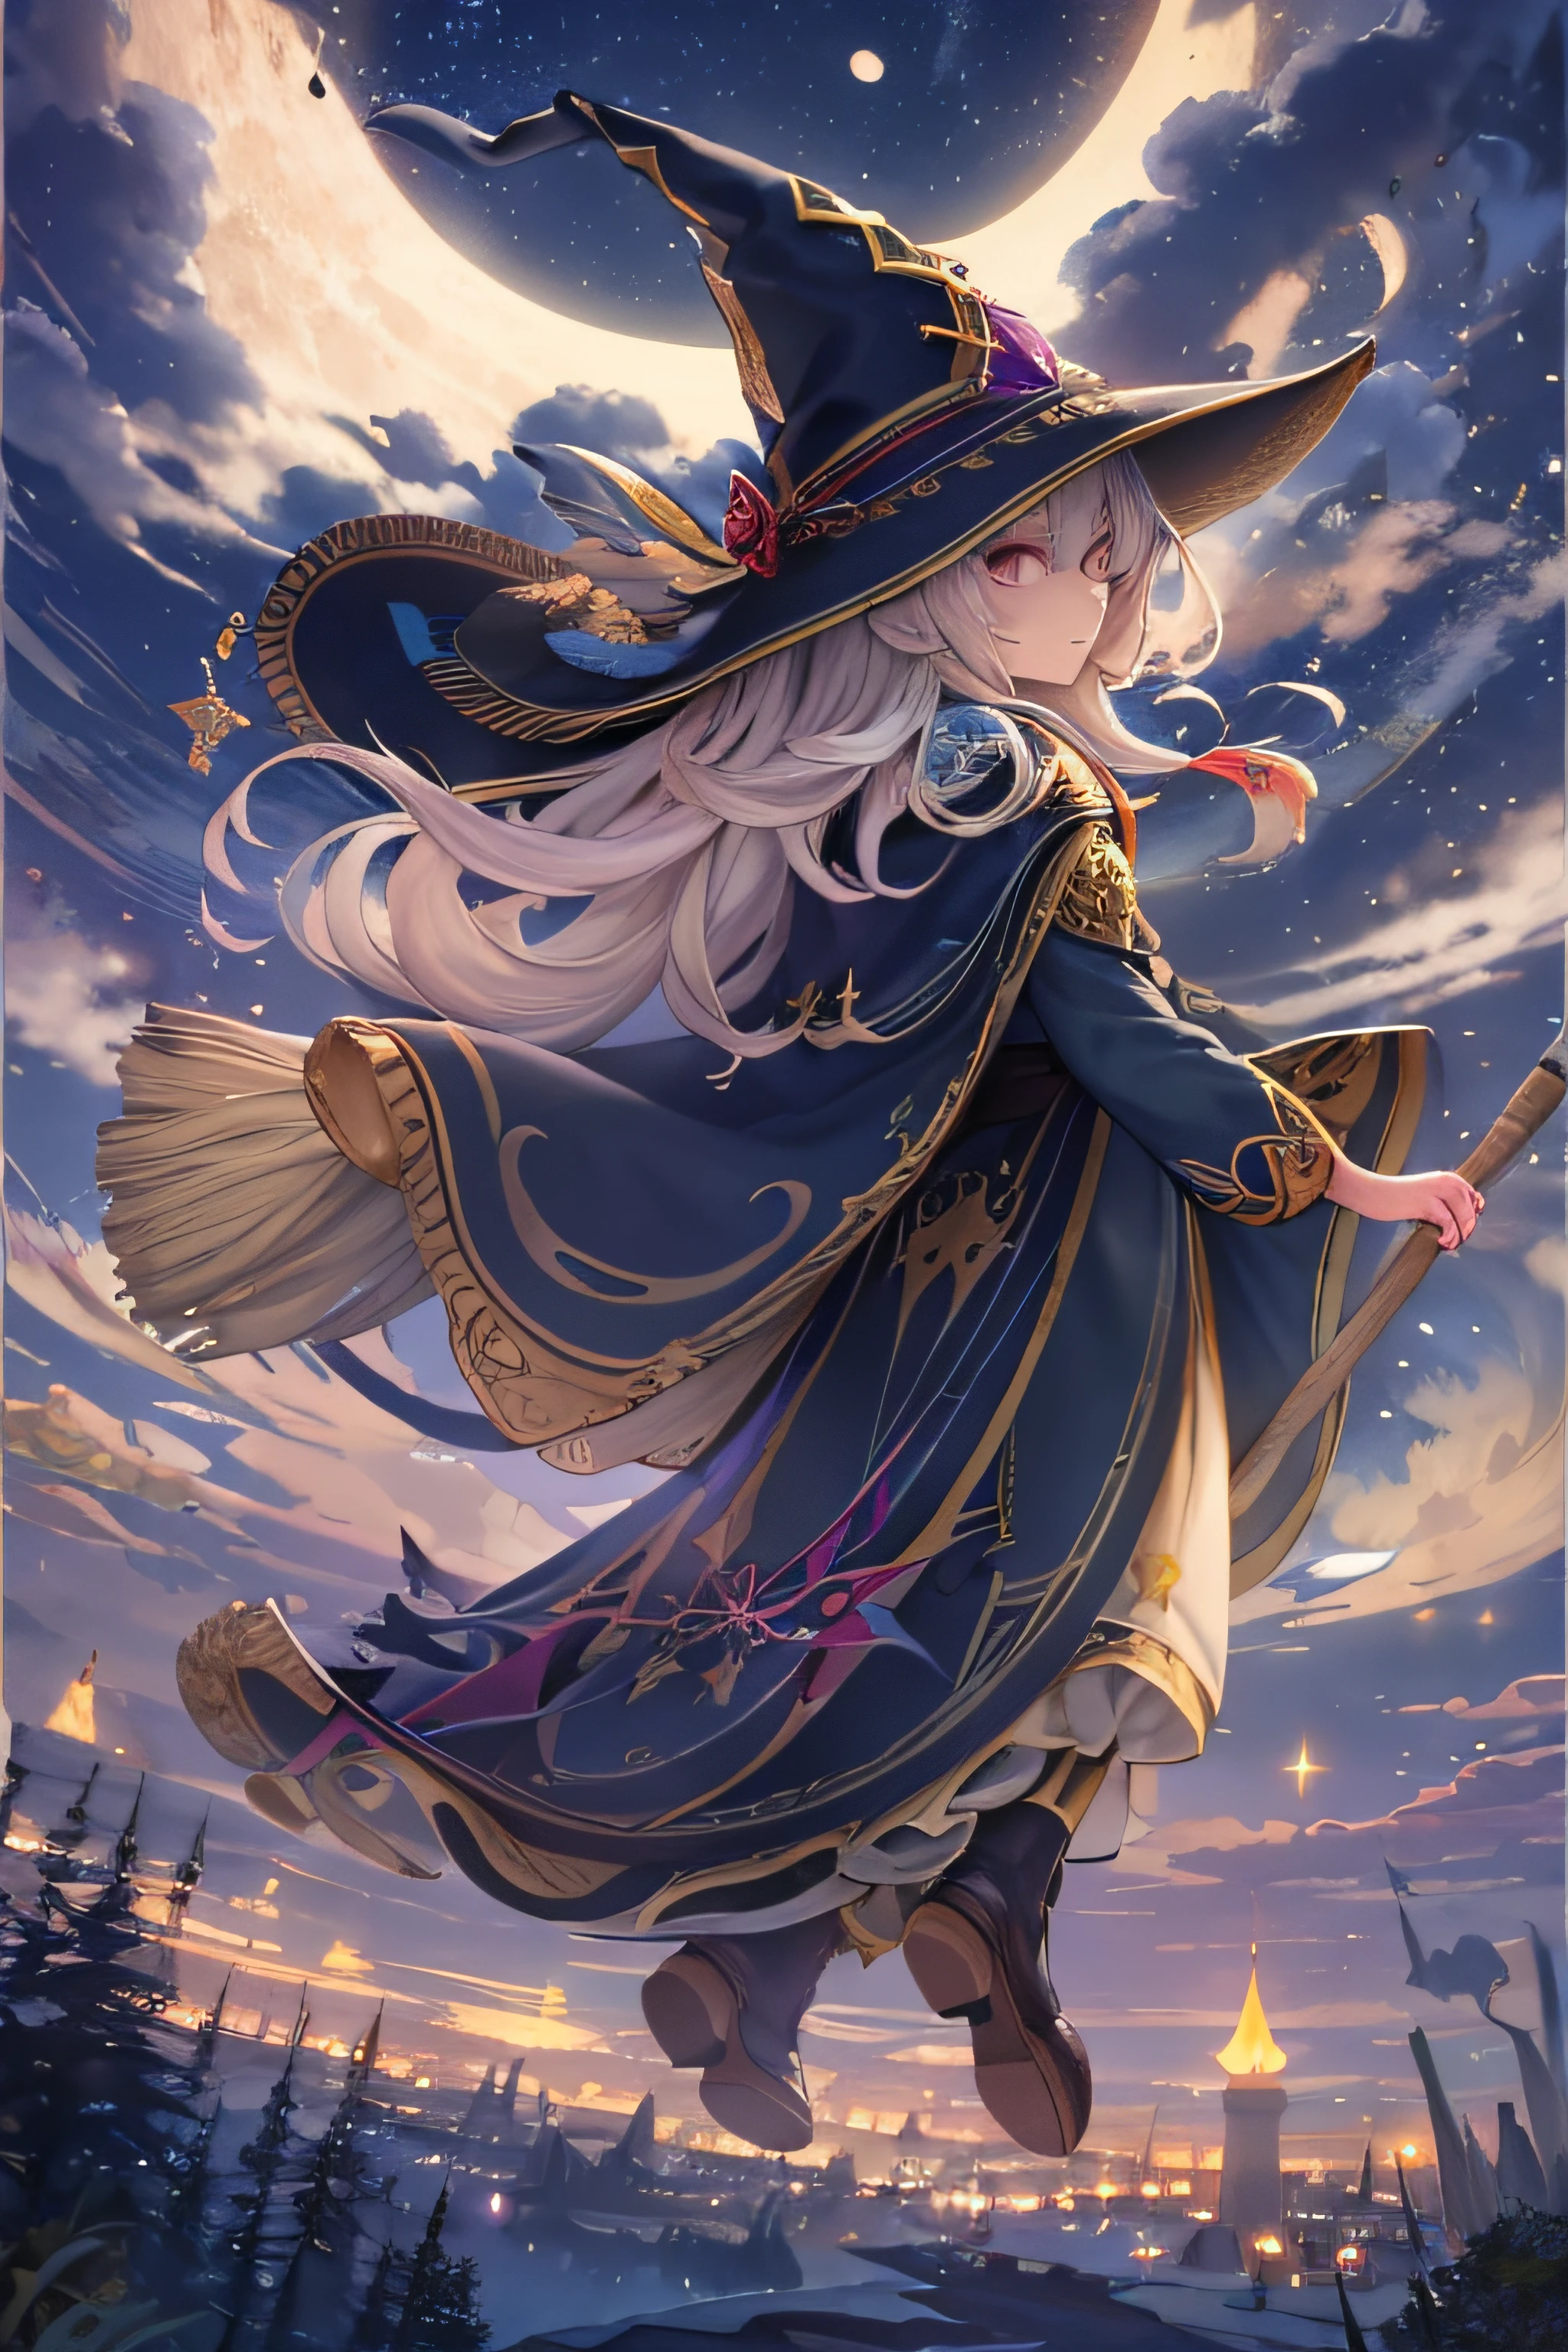 Top quality, ultra detail, illustration, 1girl, solo, fantasy, night sky, outdoors, magic, spell, moon, star, cloud, wind, hair, cape, hat, boots, broom, shining, mysterious, cape, capical, capical, capricious, capricious, playful, adventurous, , wonder, imagination, determination, skill, speed, movement, energy, realism, naturalism, figurative, expression, beauty, fantasy culture, mythology, fairy tale, folklore, legend, witch, wizard, fantasy world, composition, scale, foreground, midpoint, background, perspective, light, color, detail, beauty, wonder.